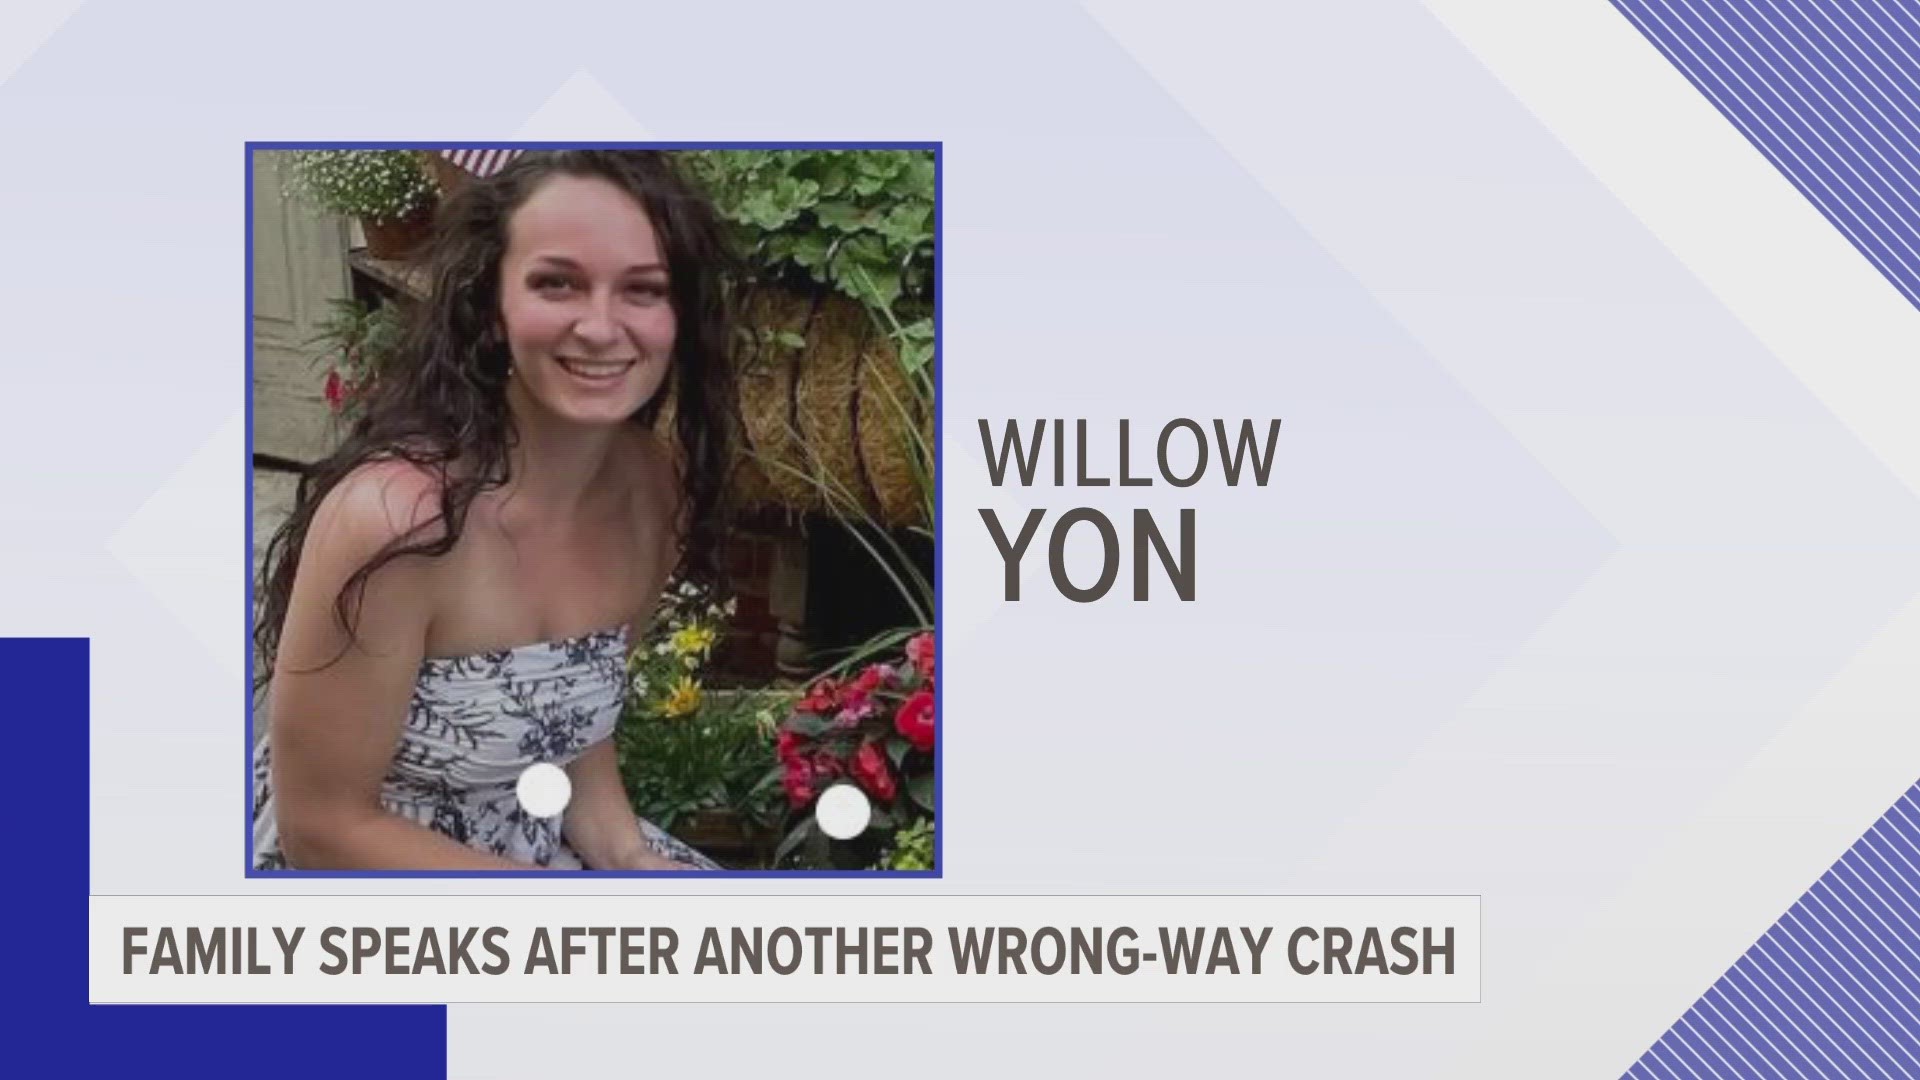 Family speaks after another wrong-way crash